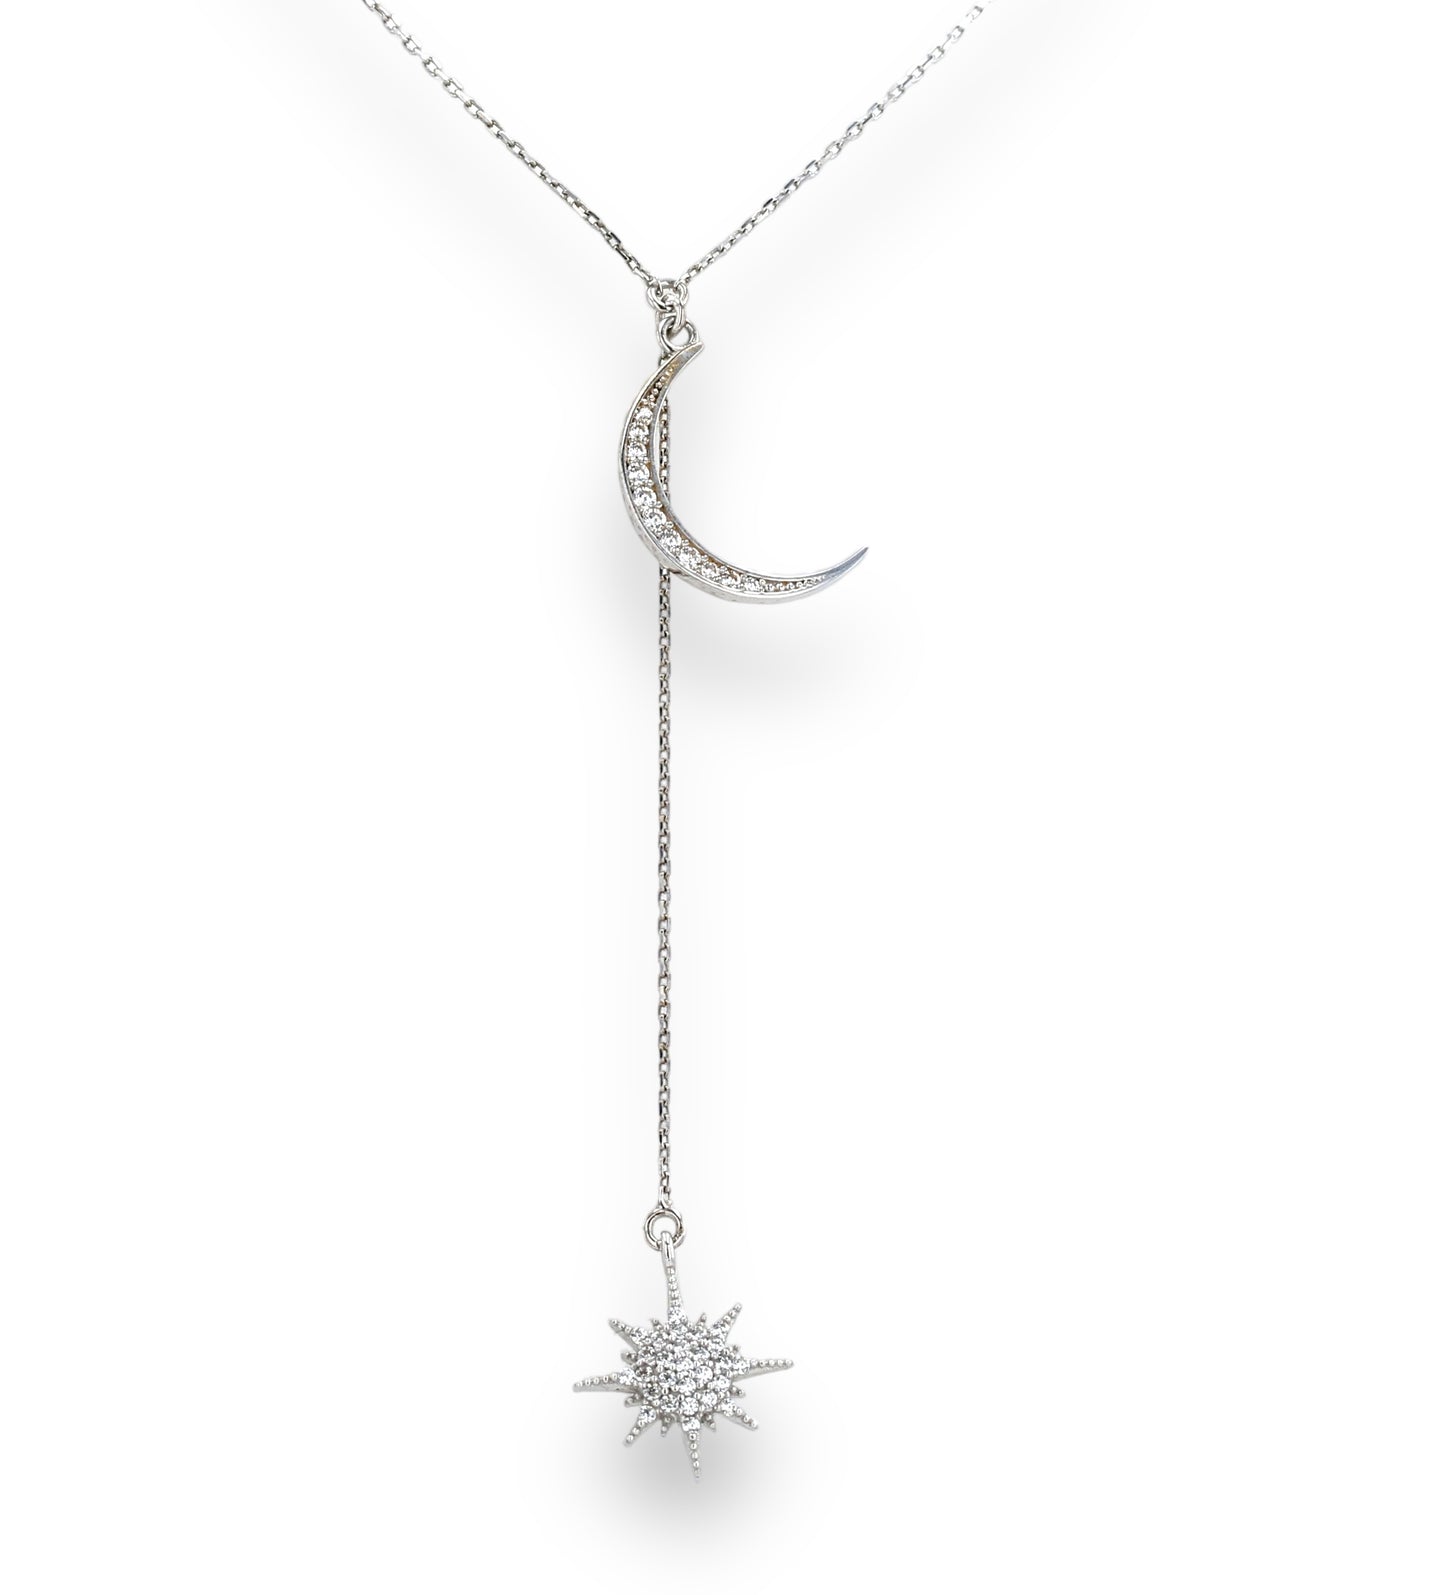 White 14k gold moon and star necklace